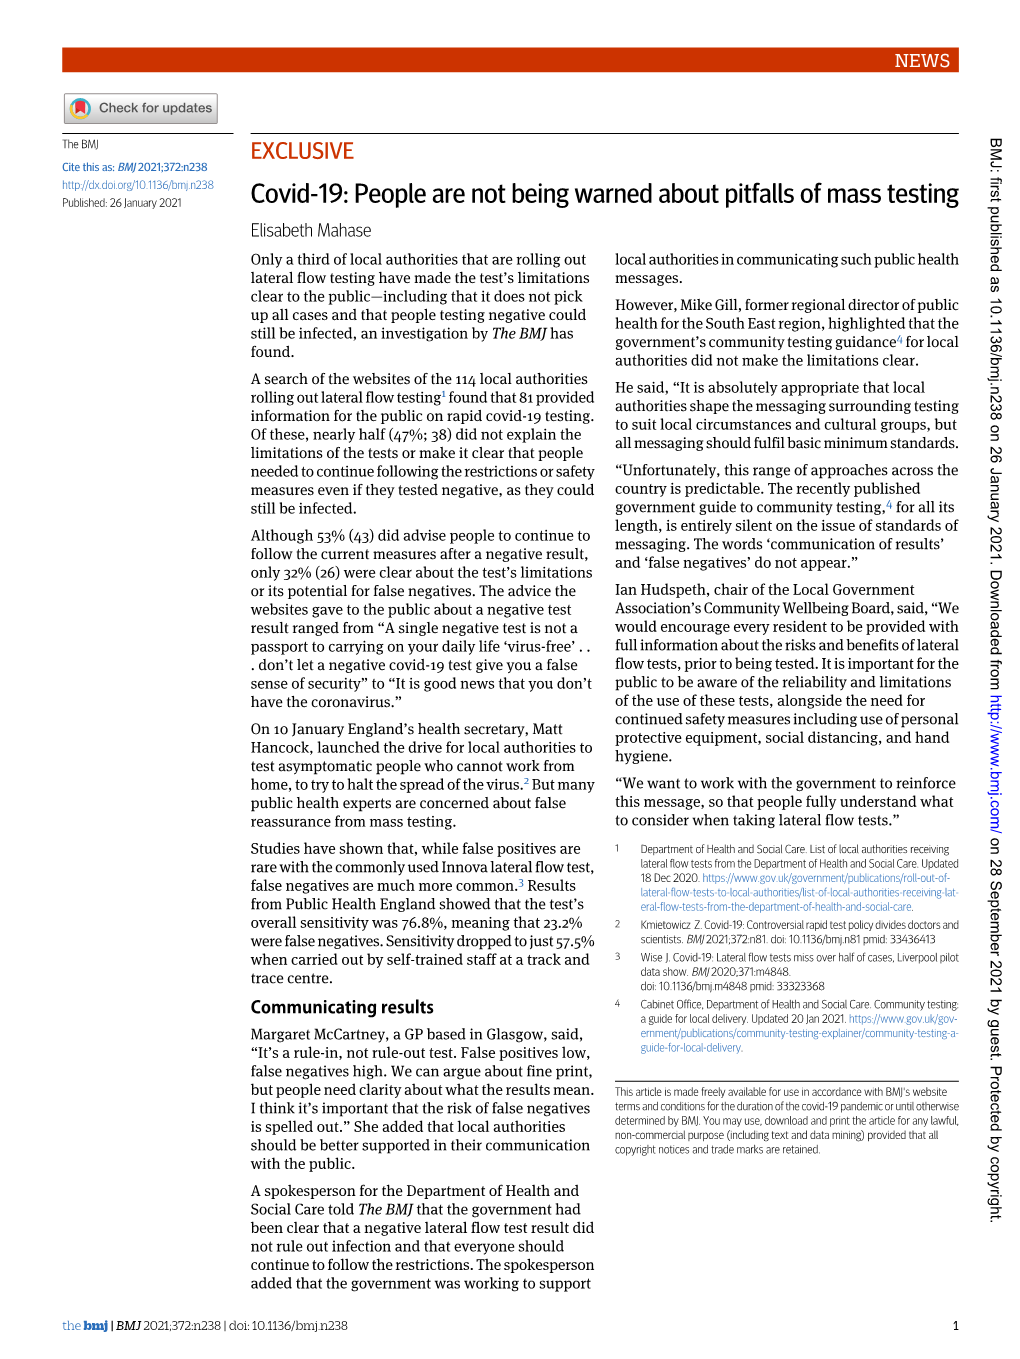 Covid-19: People Are Not Being Warned About Pitfalls of Mass Testing